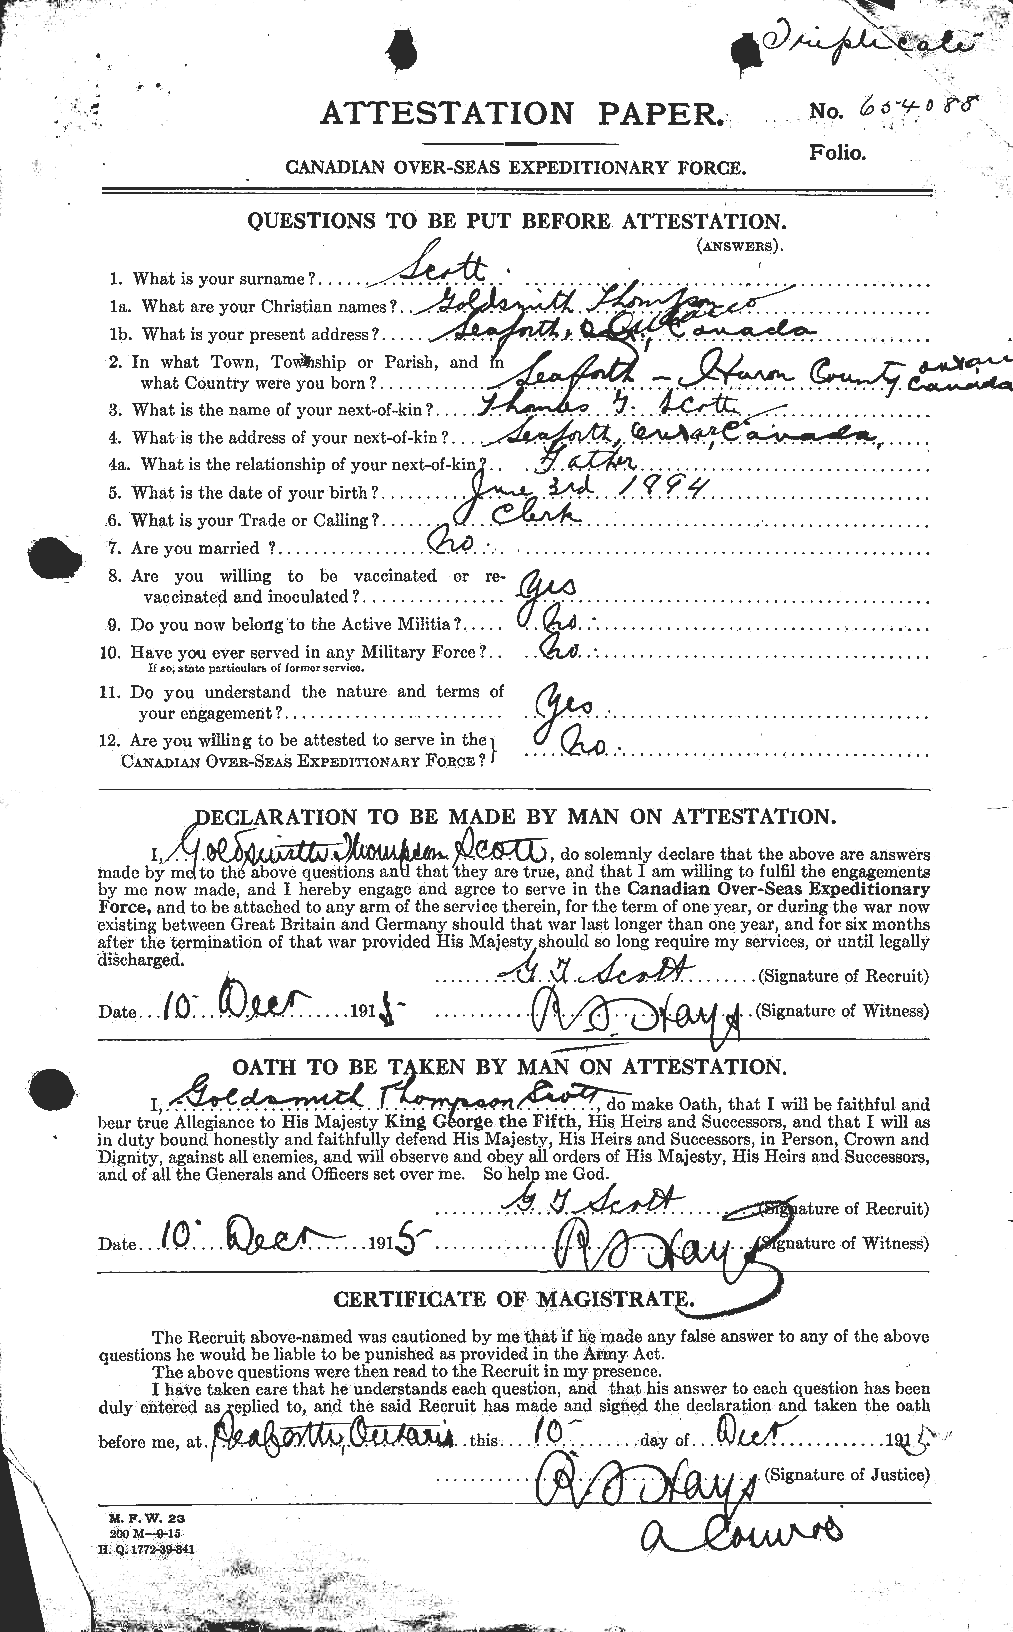 Personnel Records of the First World War - CEF 094046a